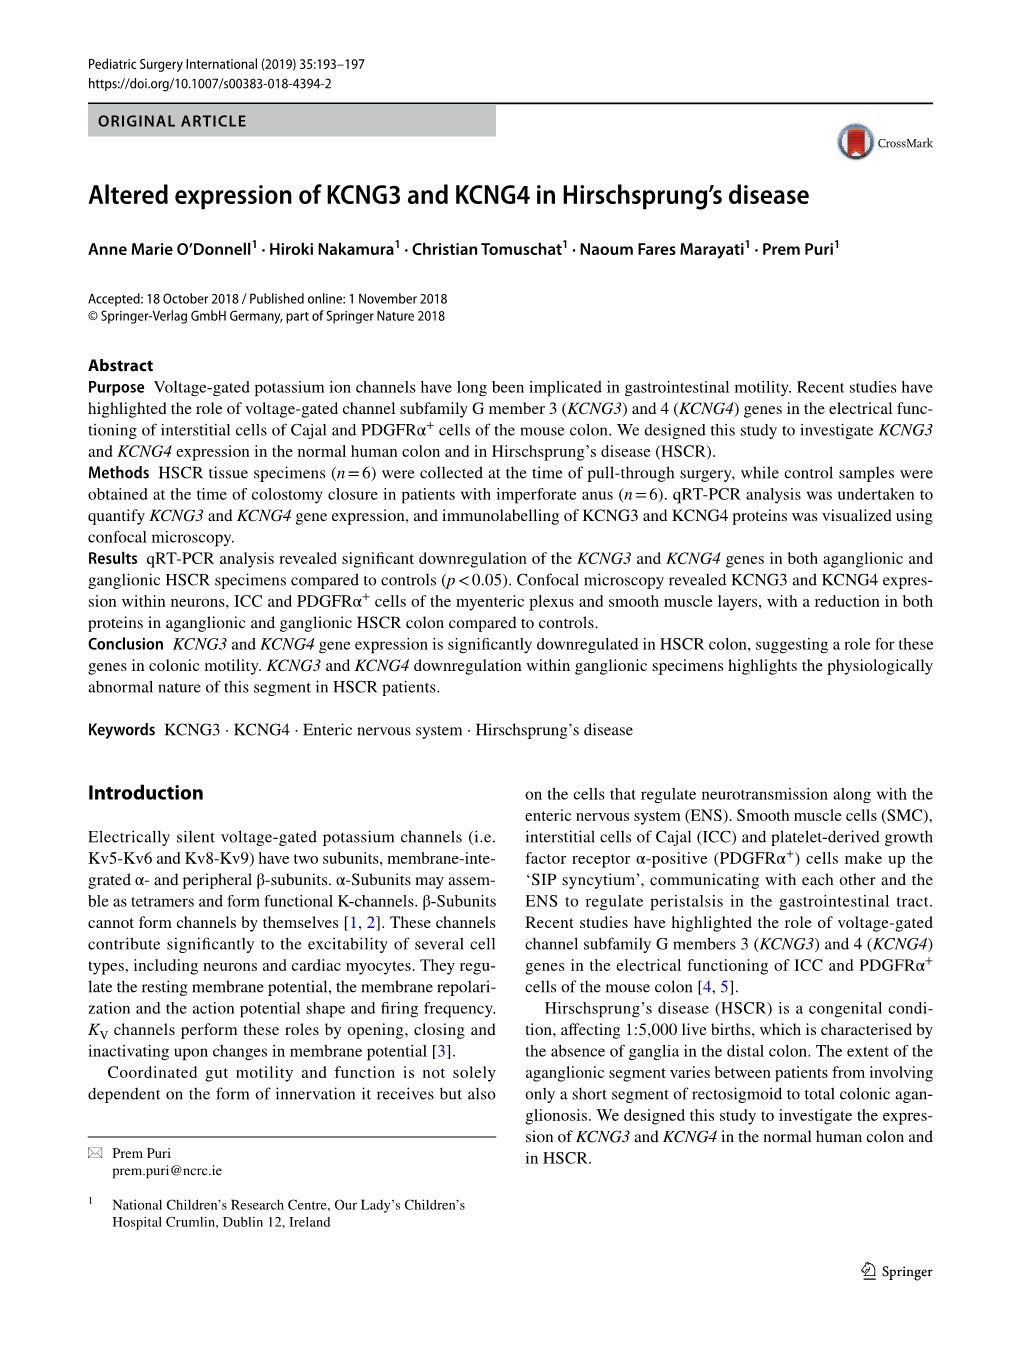 Altered Expression of KCNG3 and KCNG4 in Hirschsprung's Disease